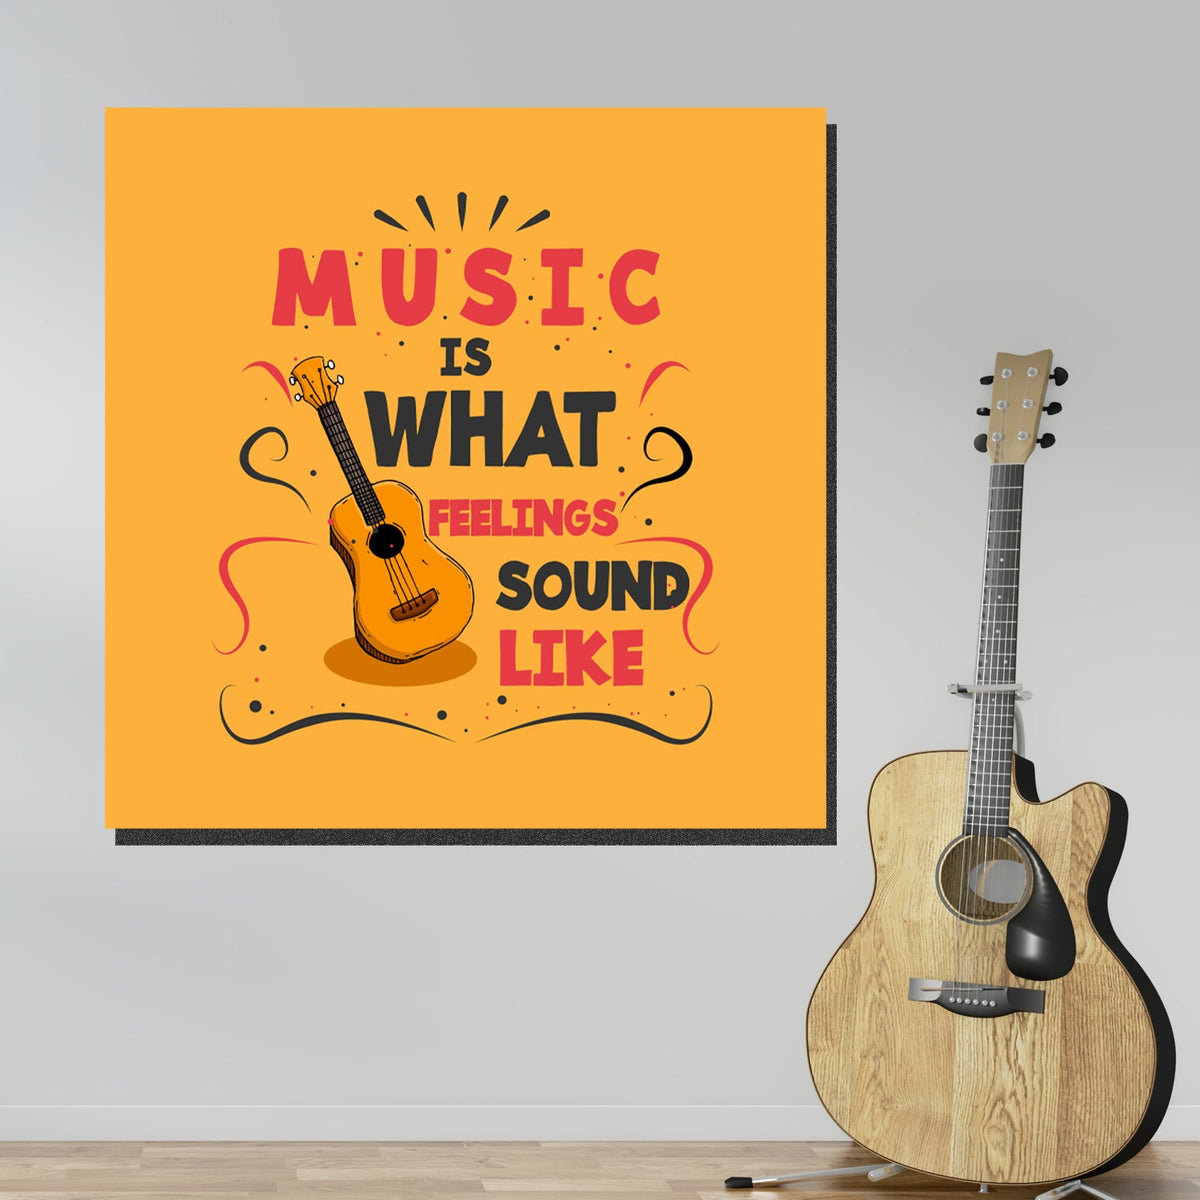 https://cdn.shopify.com/s/files/1/0387/9986/8044/products/MusicCanvasArtprintStretched-2.jpg